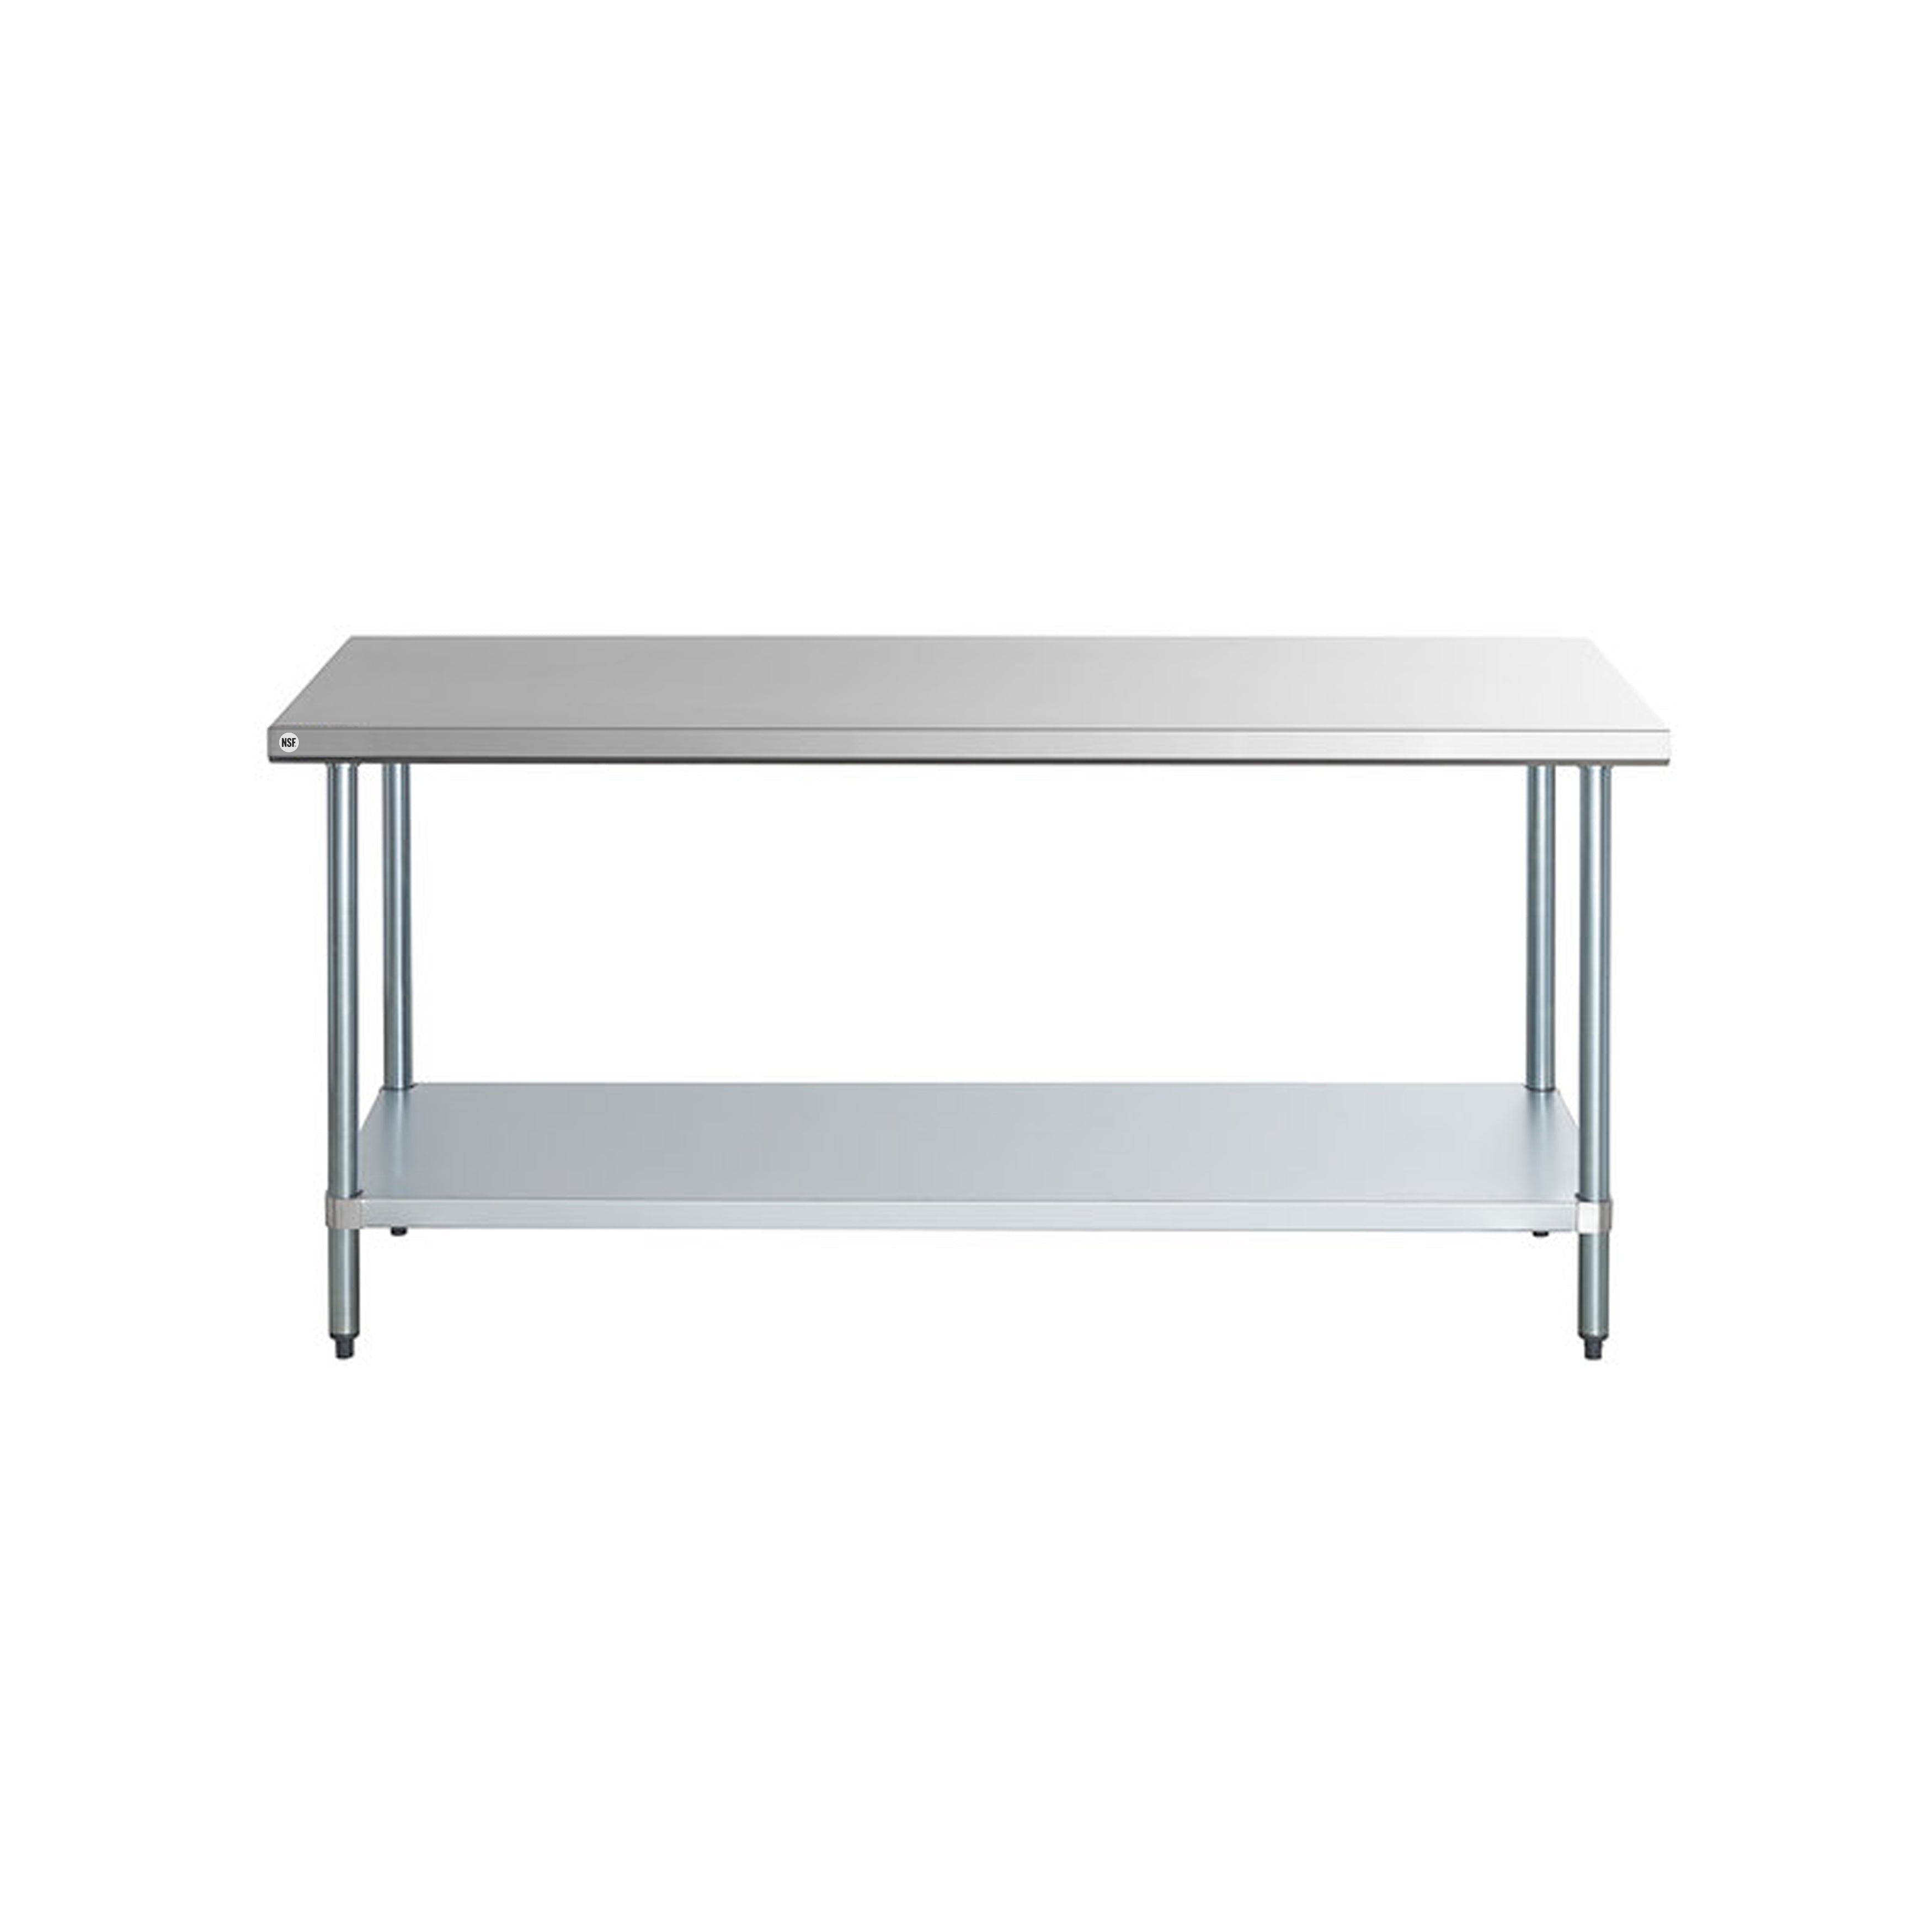 Omcan - 19137, Commercial 24" x 36" Stainless Steel Kitchen Work Table 900lbs Heavy Duty